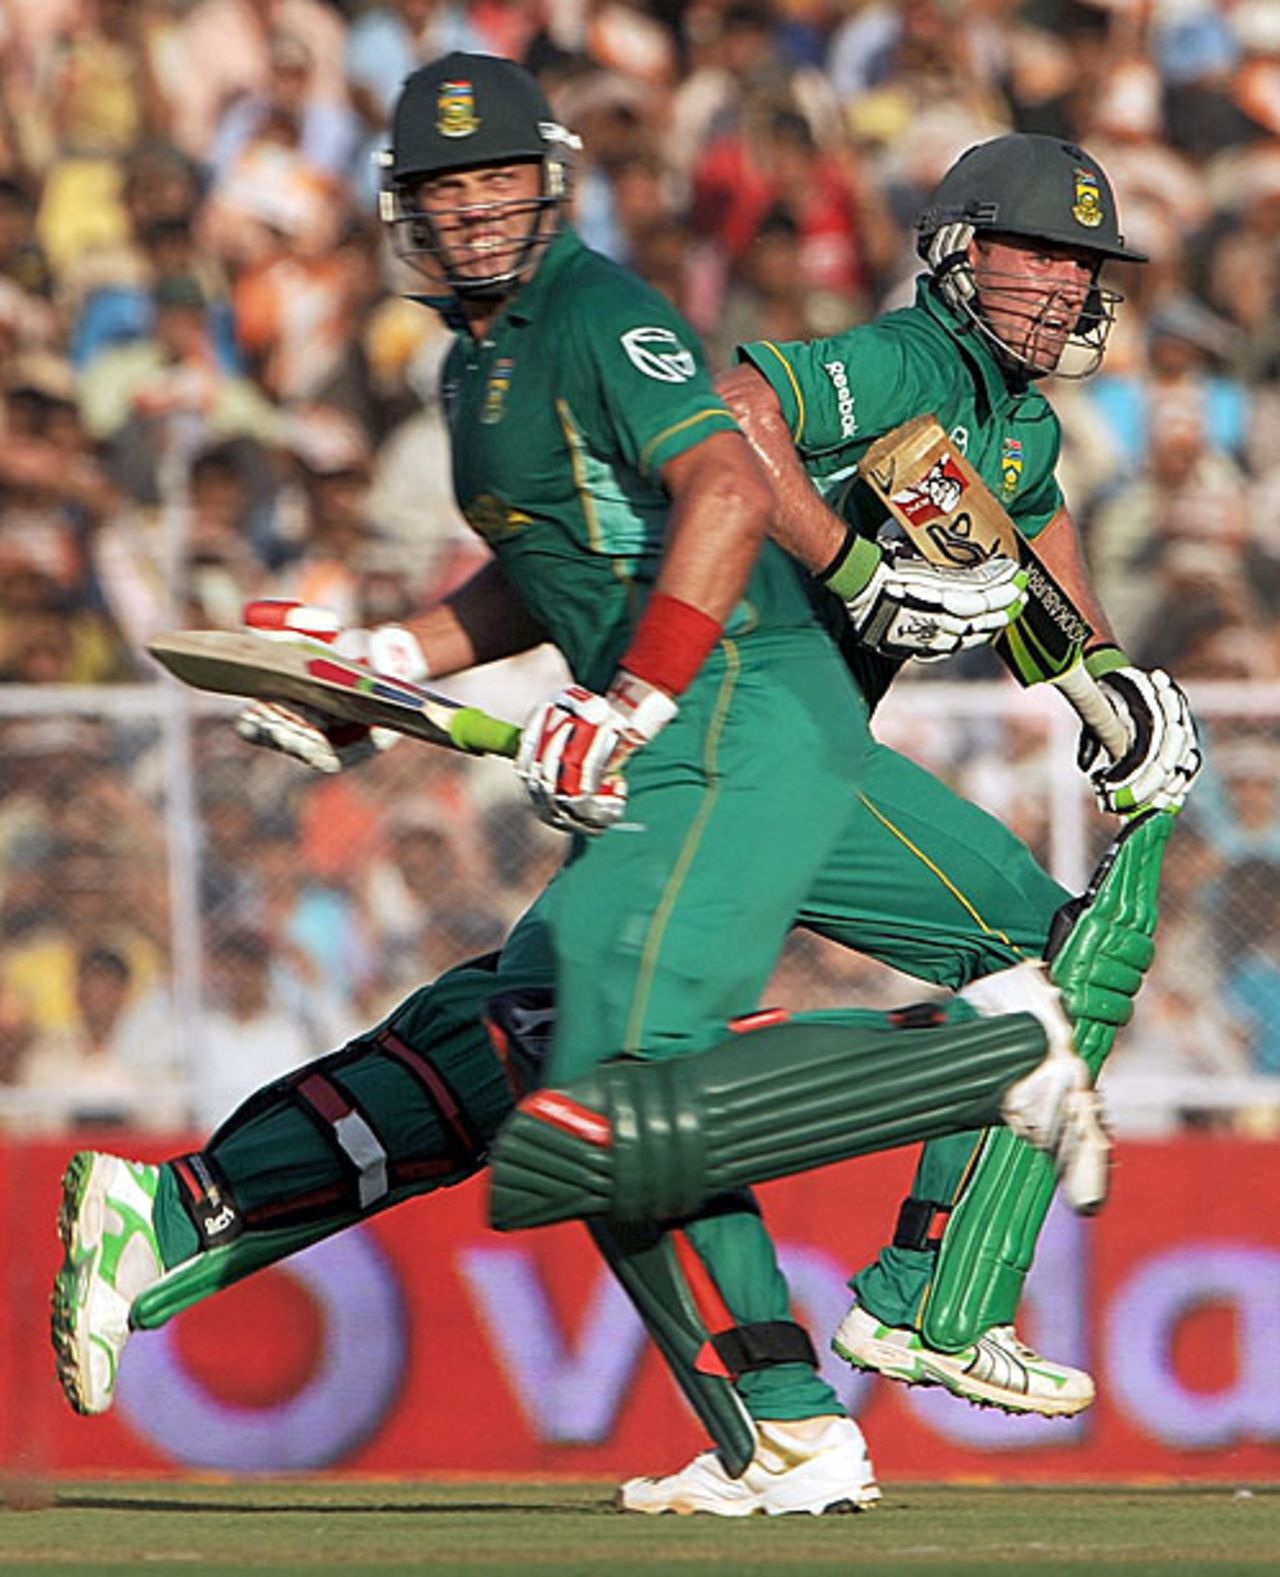 AB de Villiers and Jacques Kallis added a massive 173 for the third wicket, India v South Africa, 3rd ODI, Ahmedabad, February 27, 2010